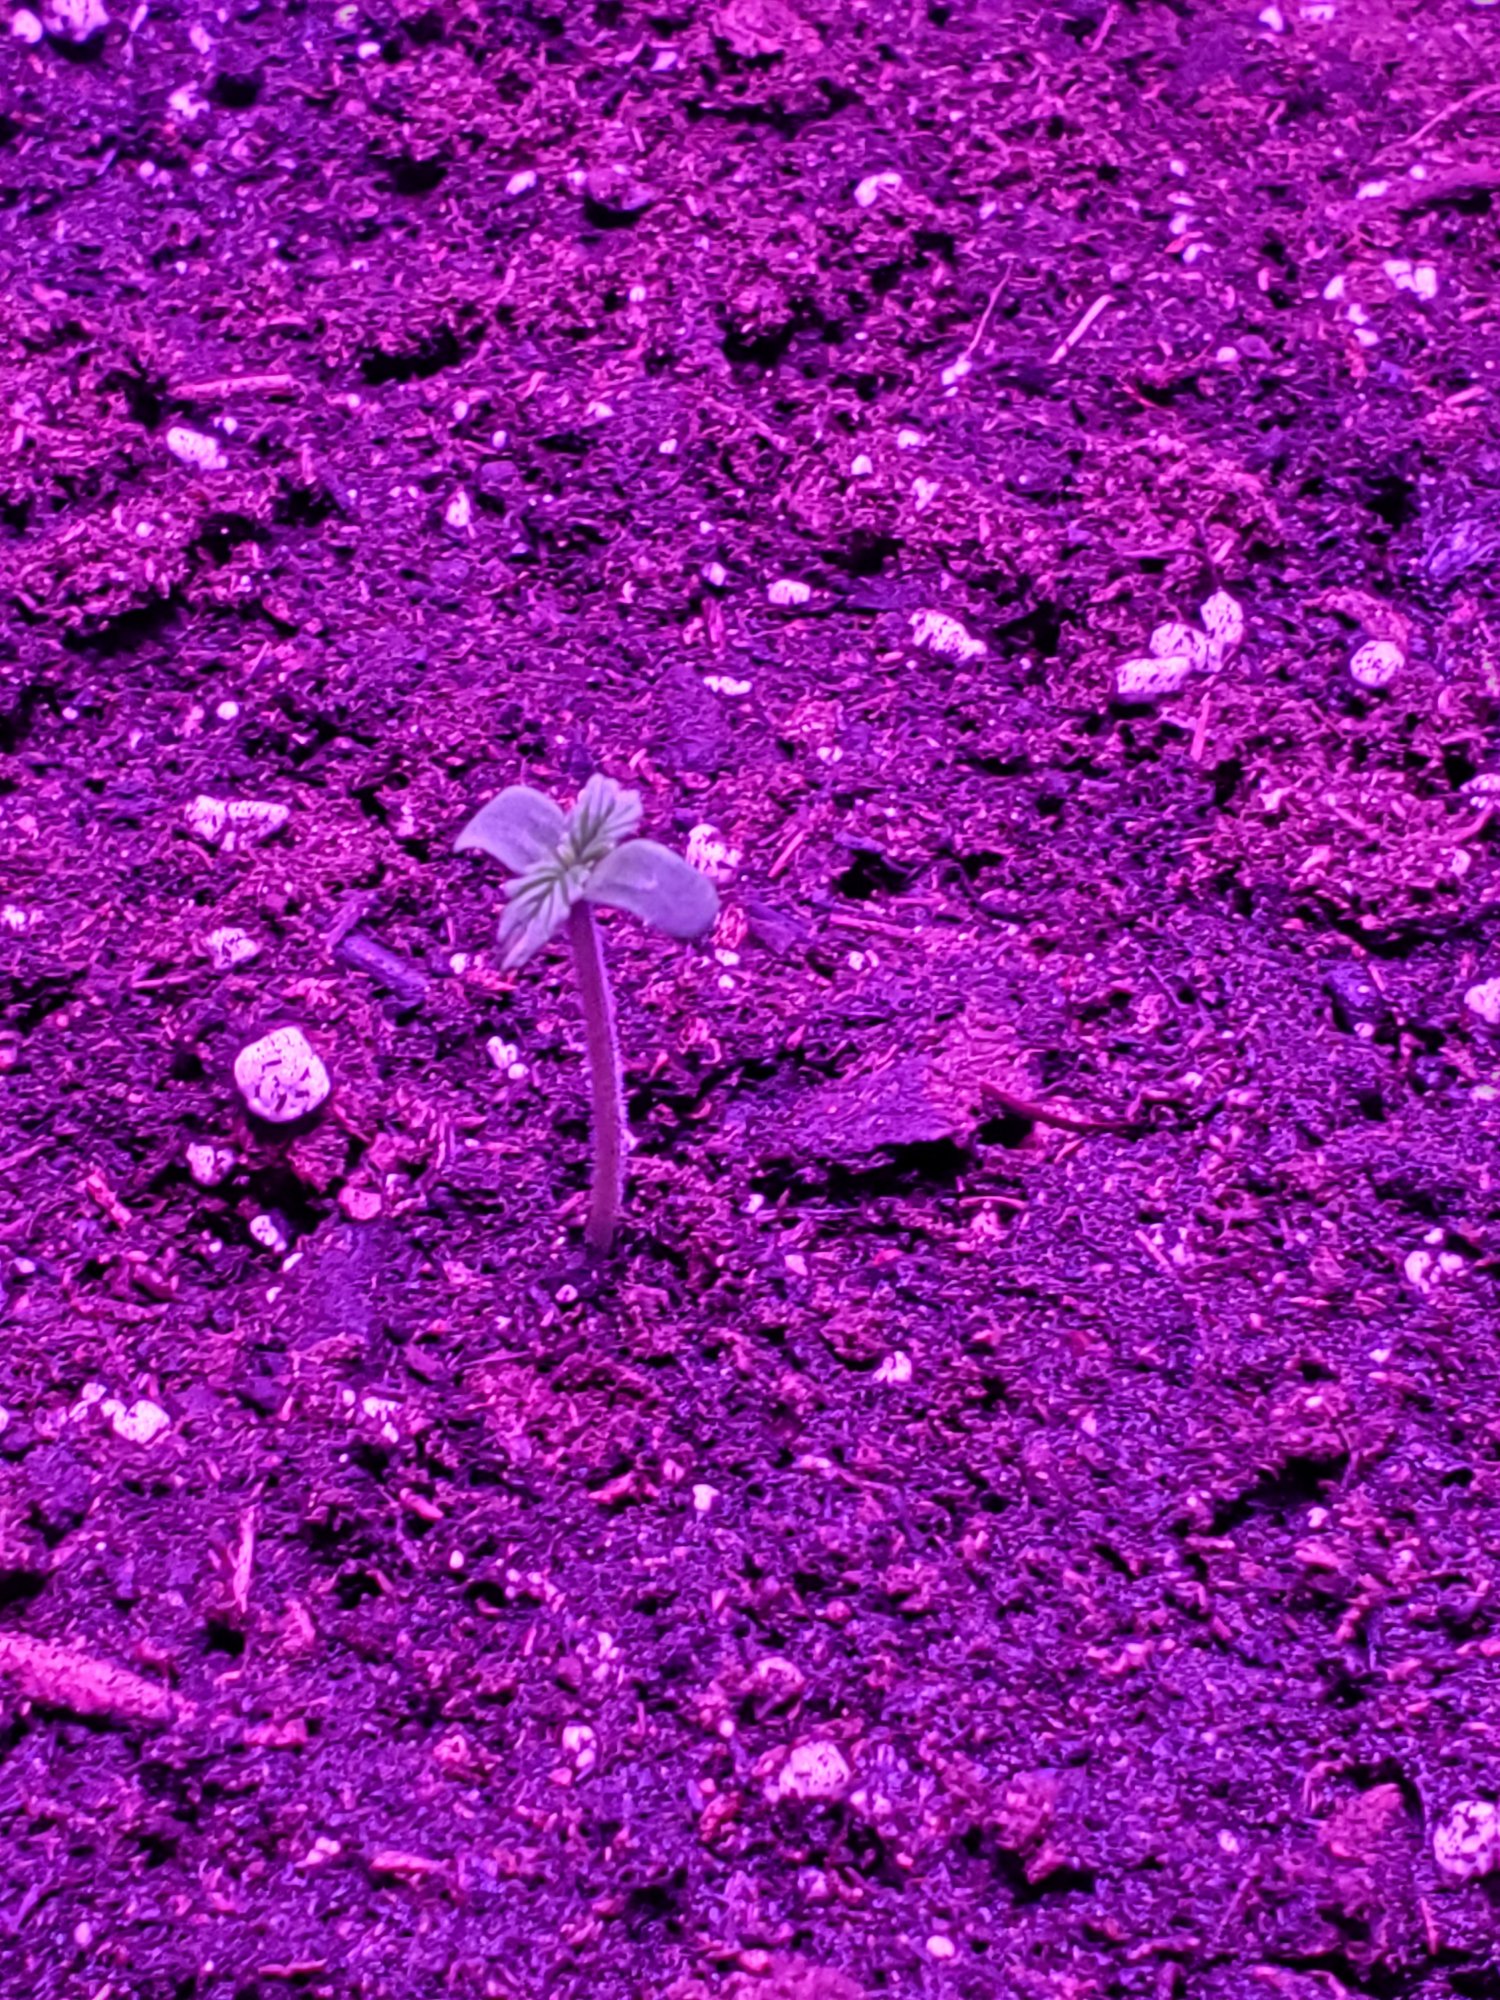 New to growing seed coat stayed on and i was unaware 3